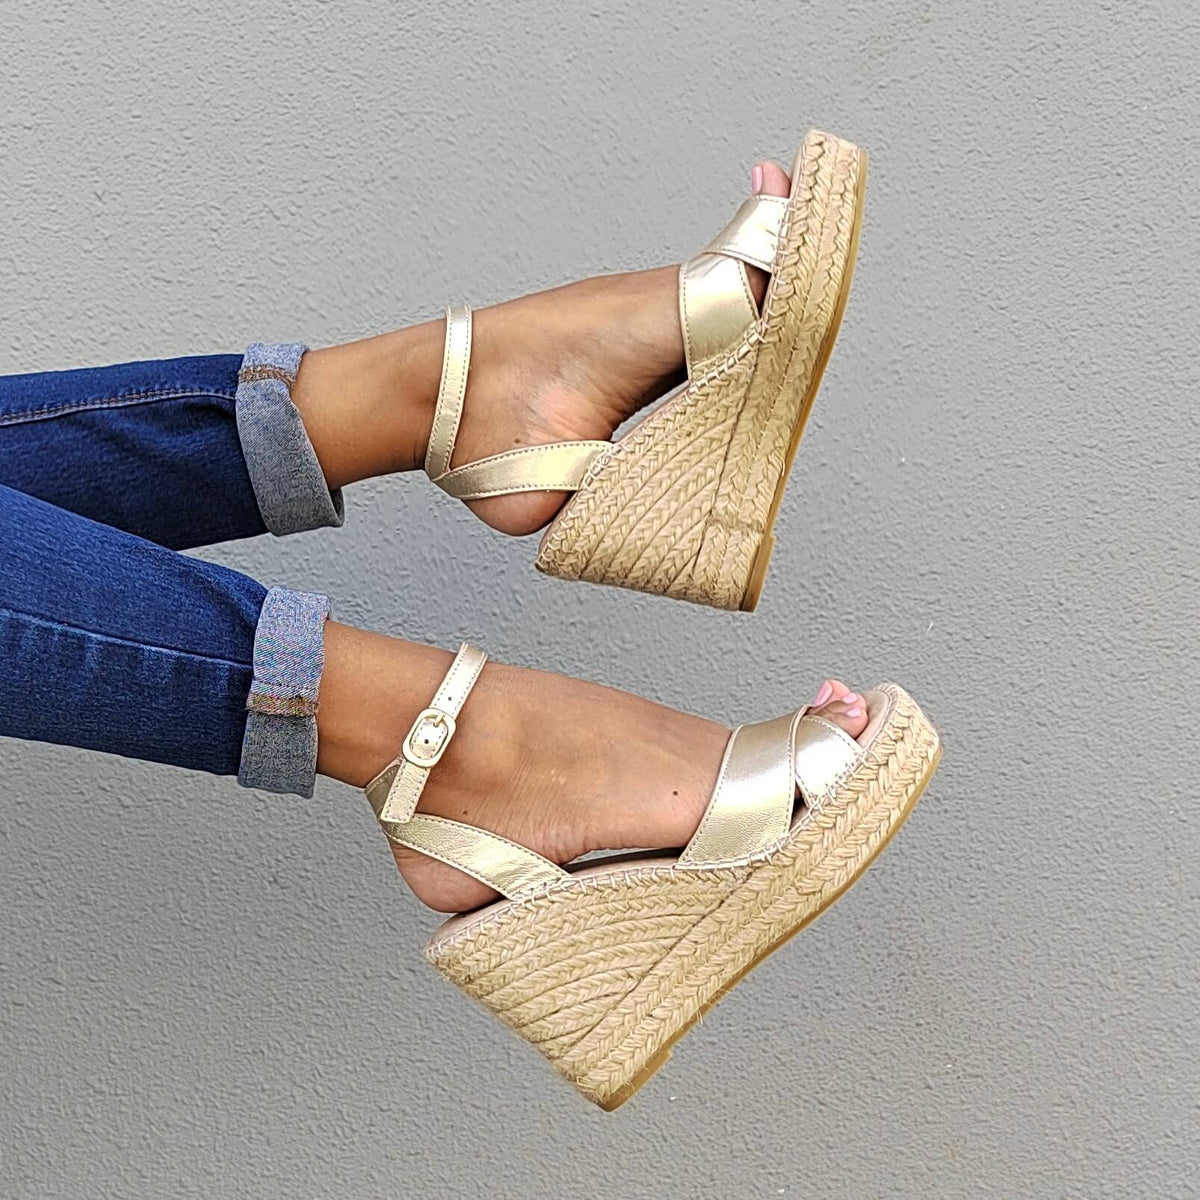 Lucia Espadrille Wedge in Champagne - Shoeq